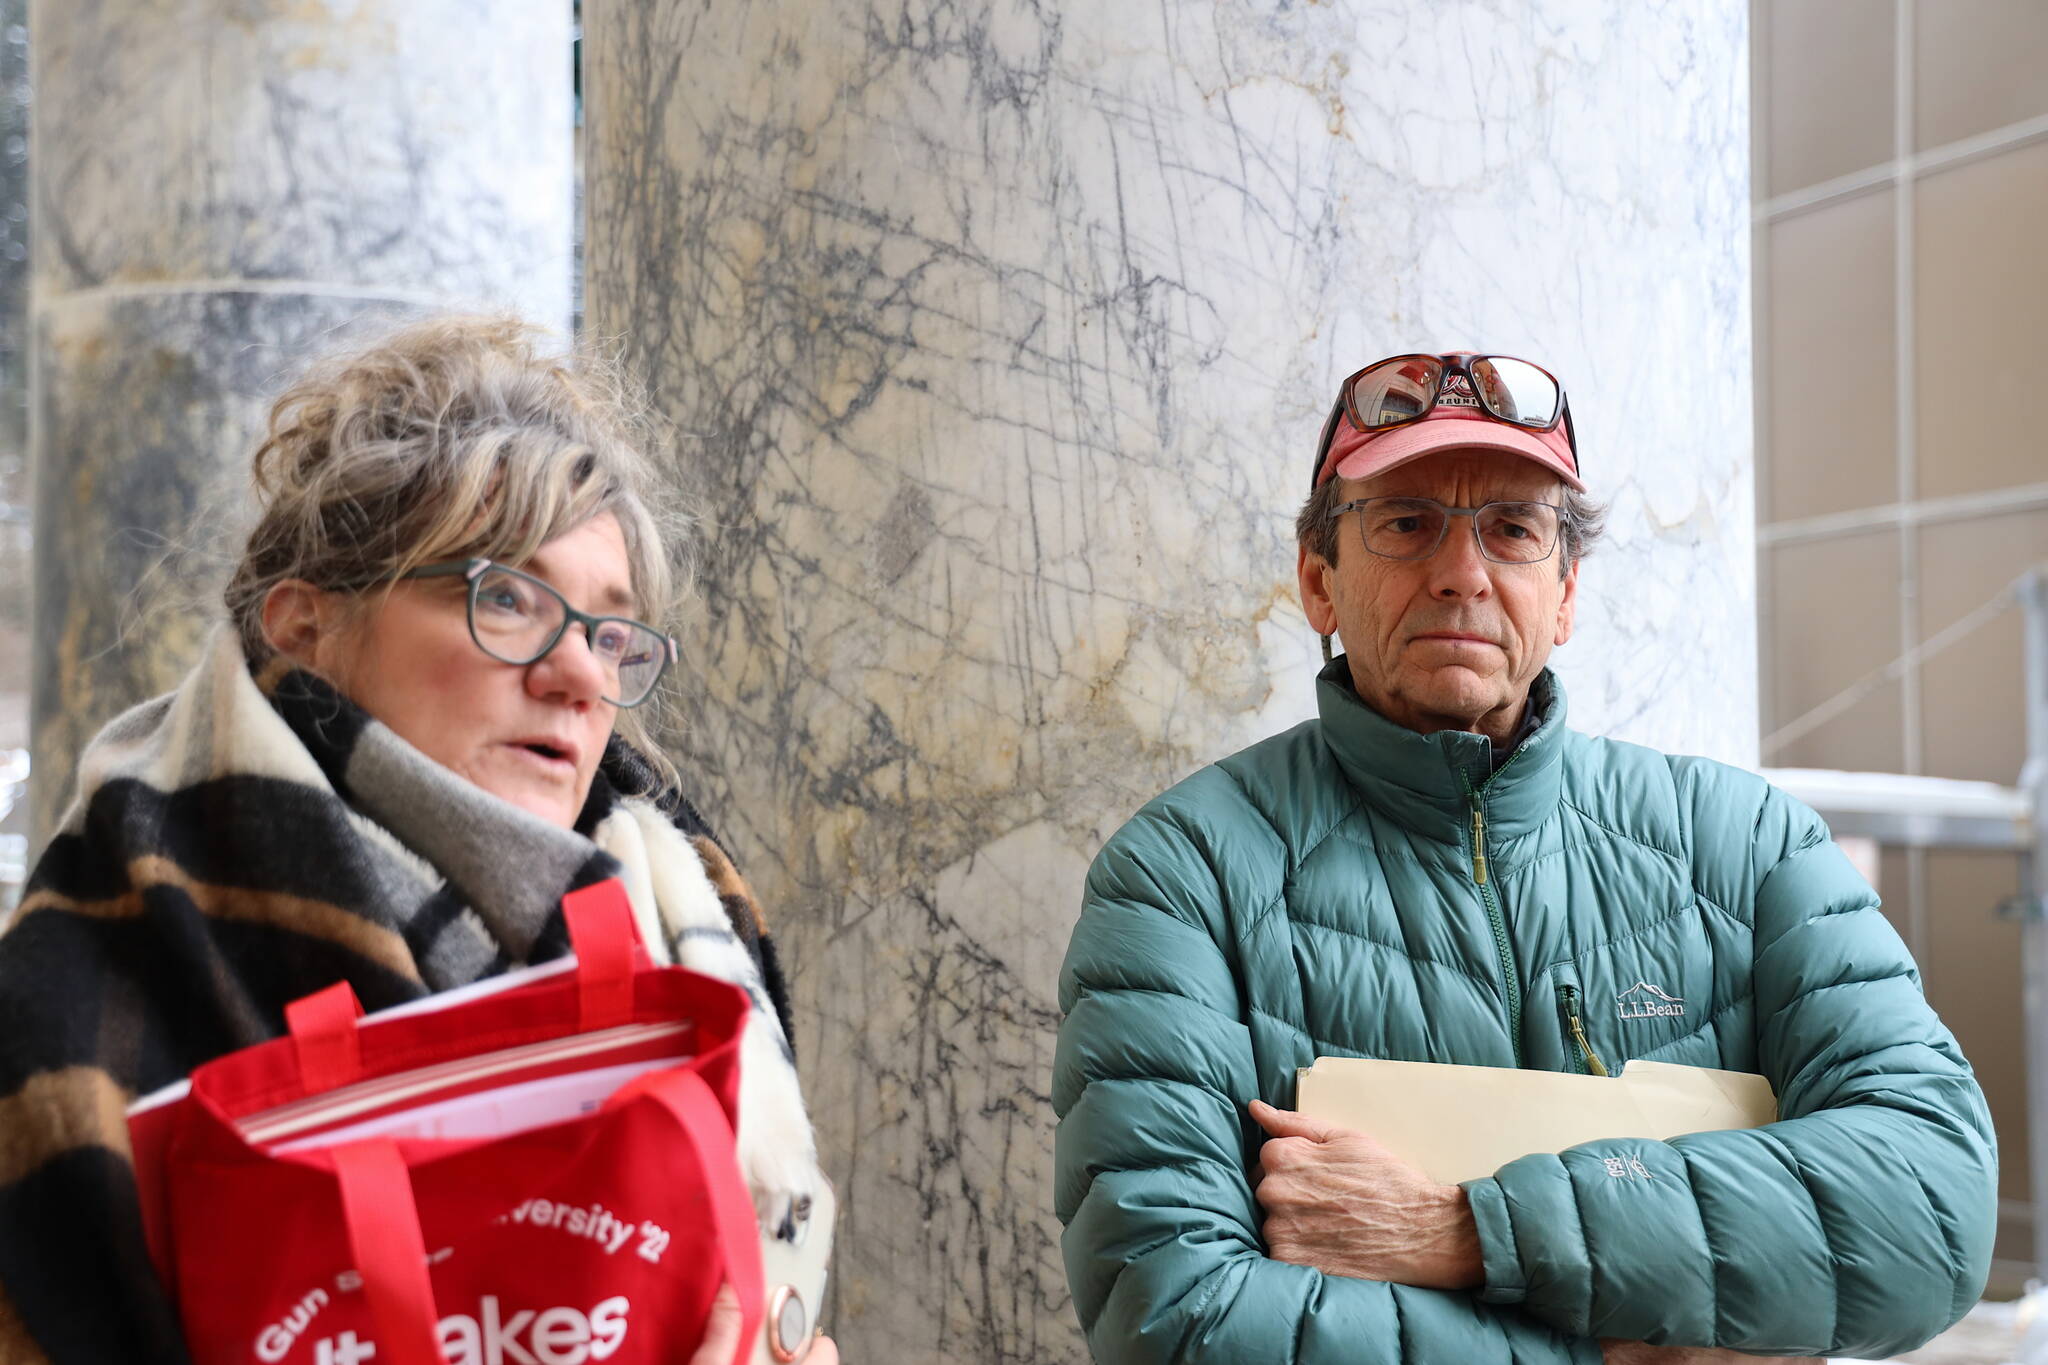 Tamara Kruse and Frank Rue, volunteers with Moms Demand Action, discuss their meetings about proposed gun safety legislation with state lawmakers at the Alaska State Capitol on Tuesday. (Clarise Larson / Juneau Empire)